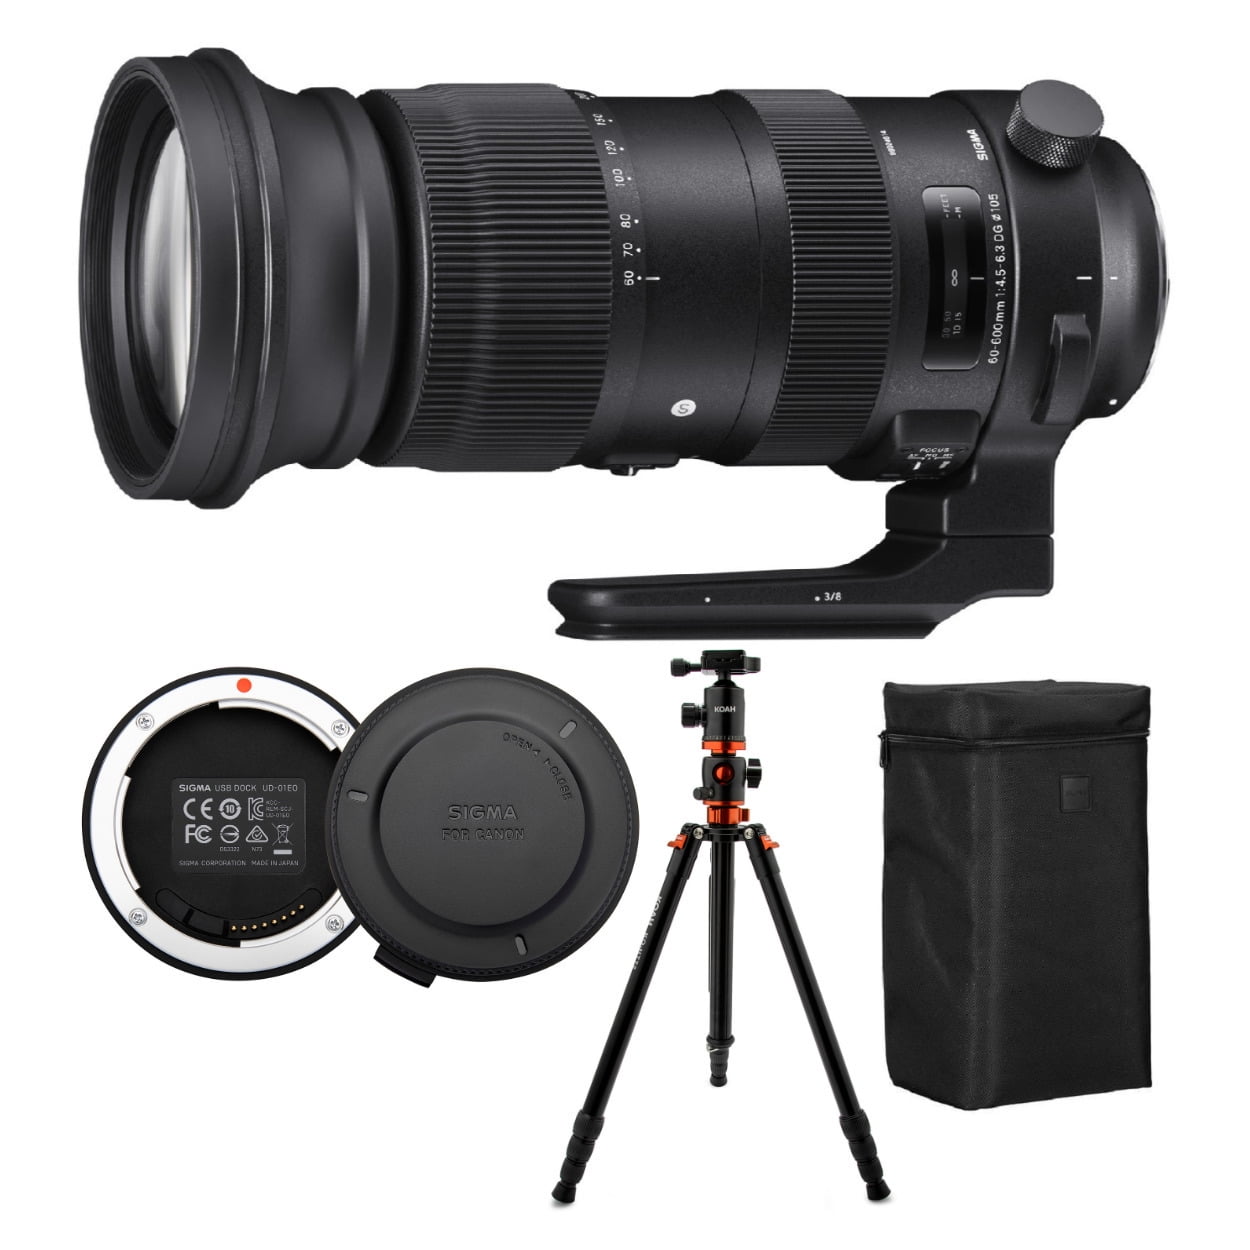 Sigma 60-600mm f/4.5-6.3 DG OS HSM Sports Lens for Canon with USB Dock